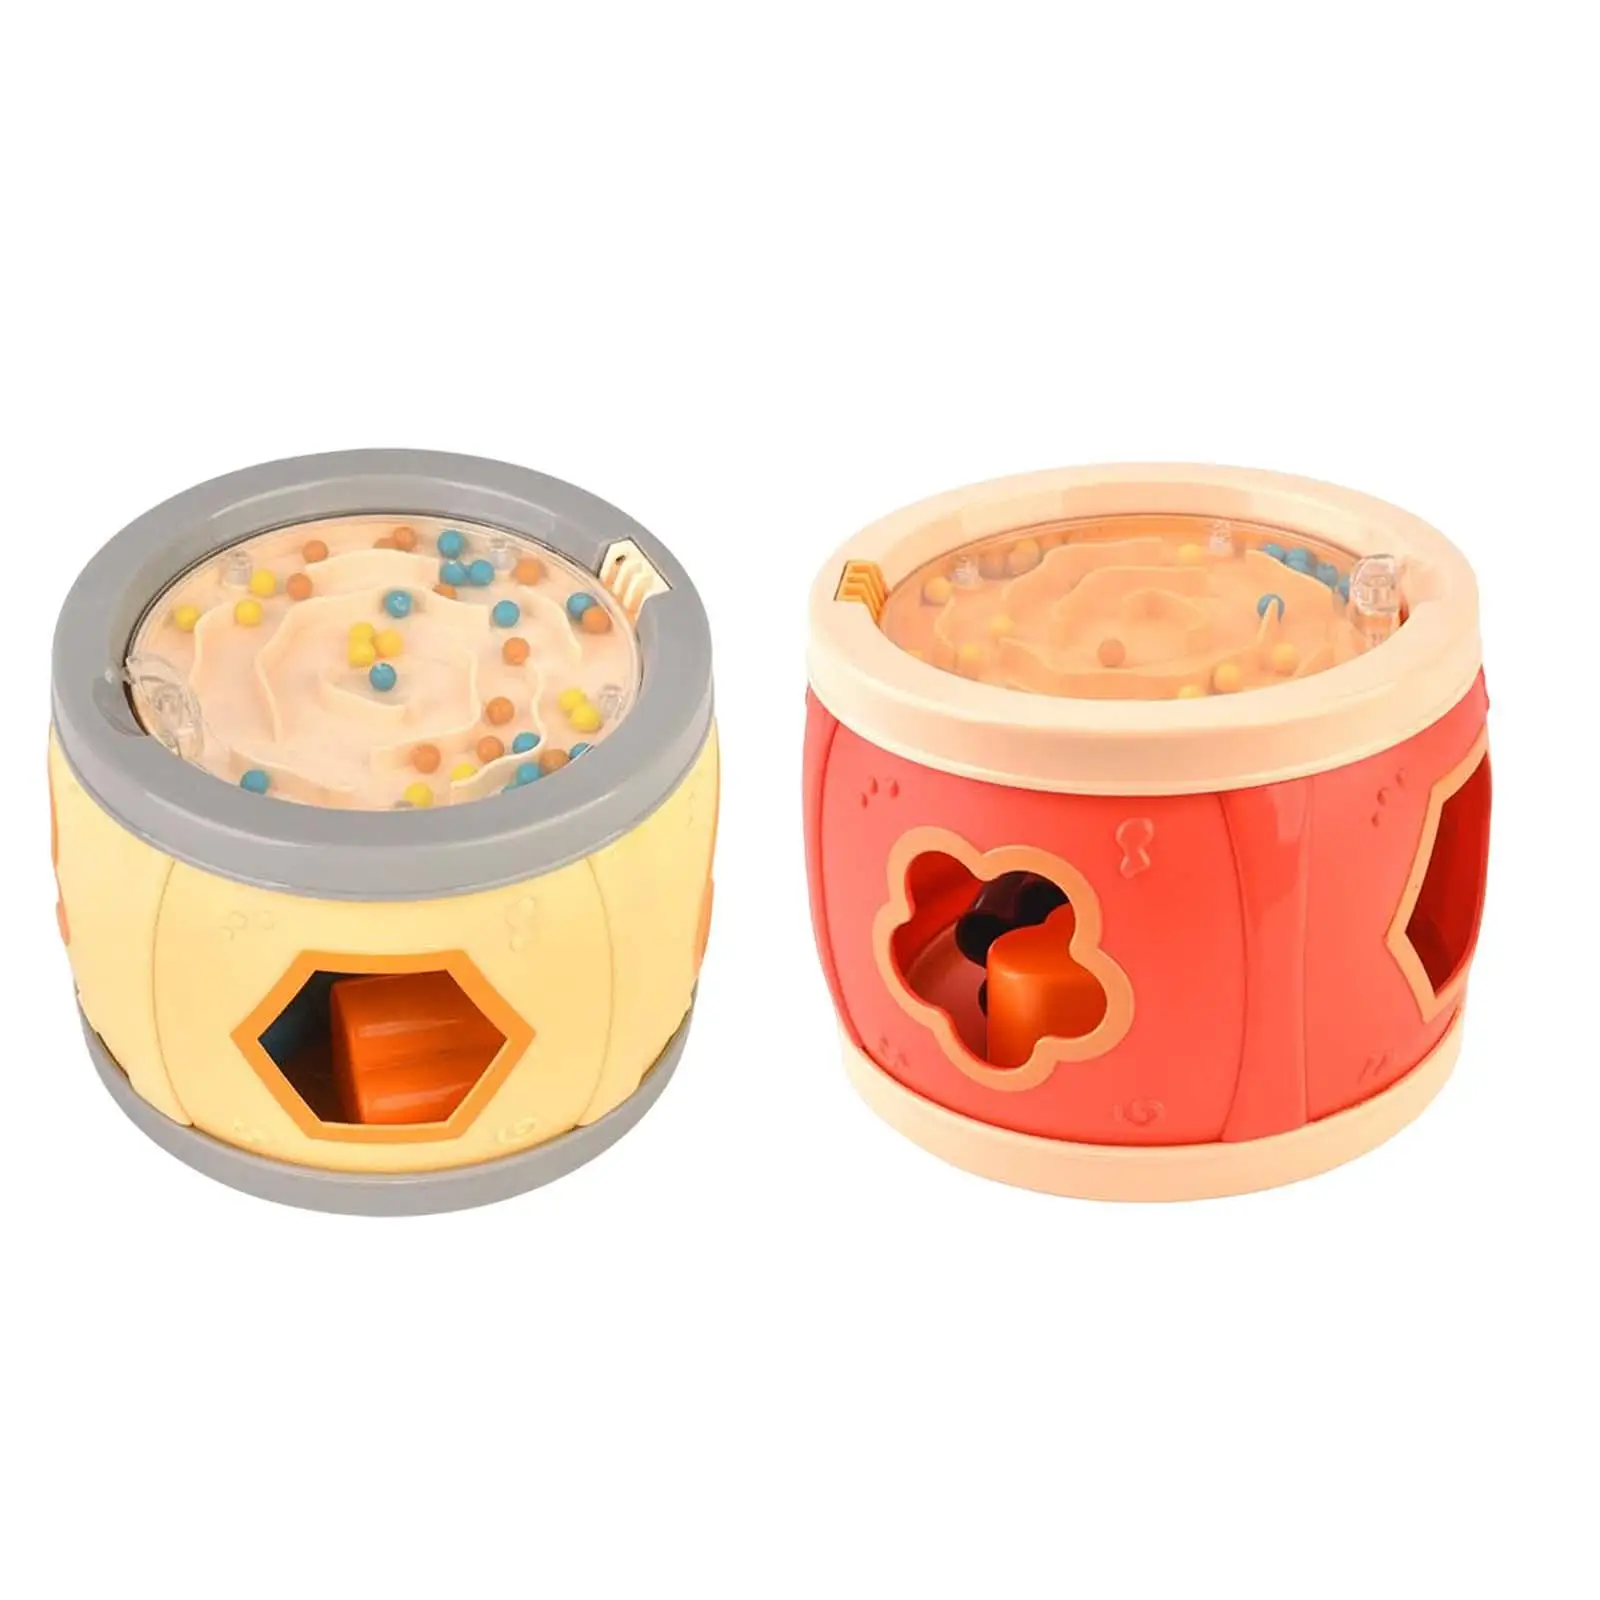 Musical Instruments Toys Double Pat Multifunctional Storage Box for Girls